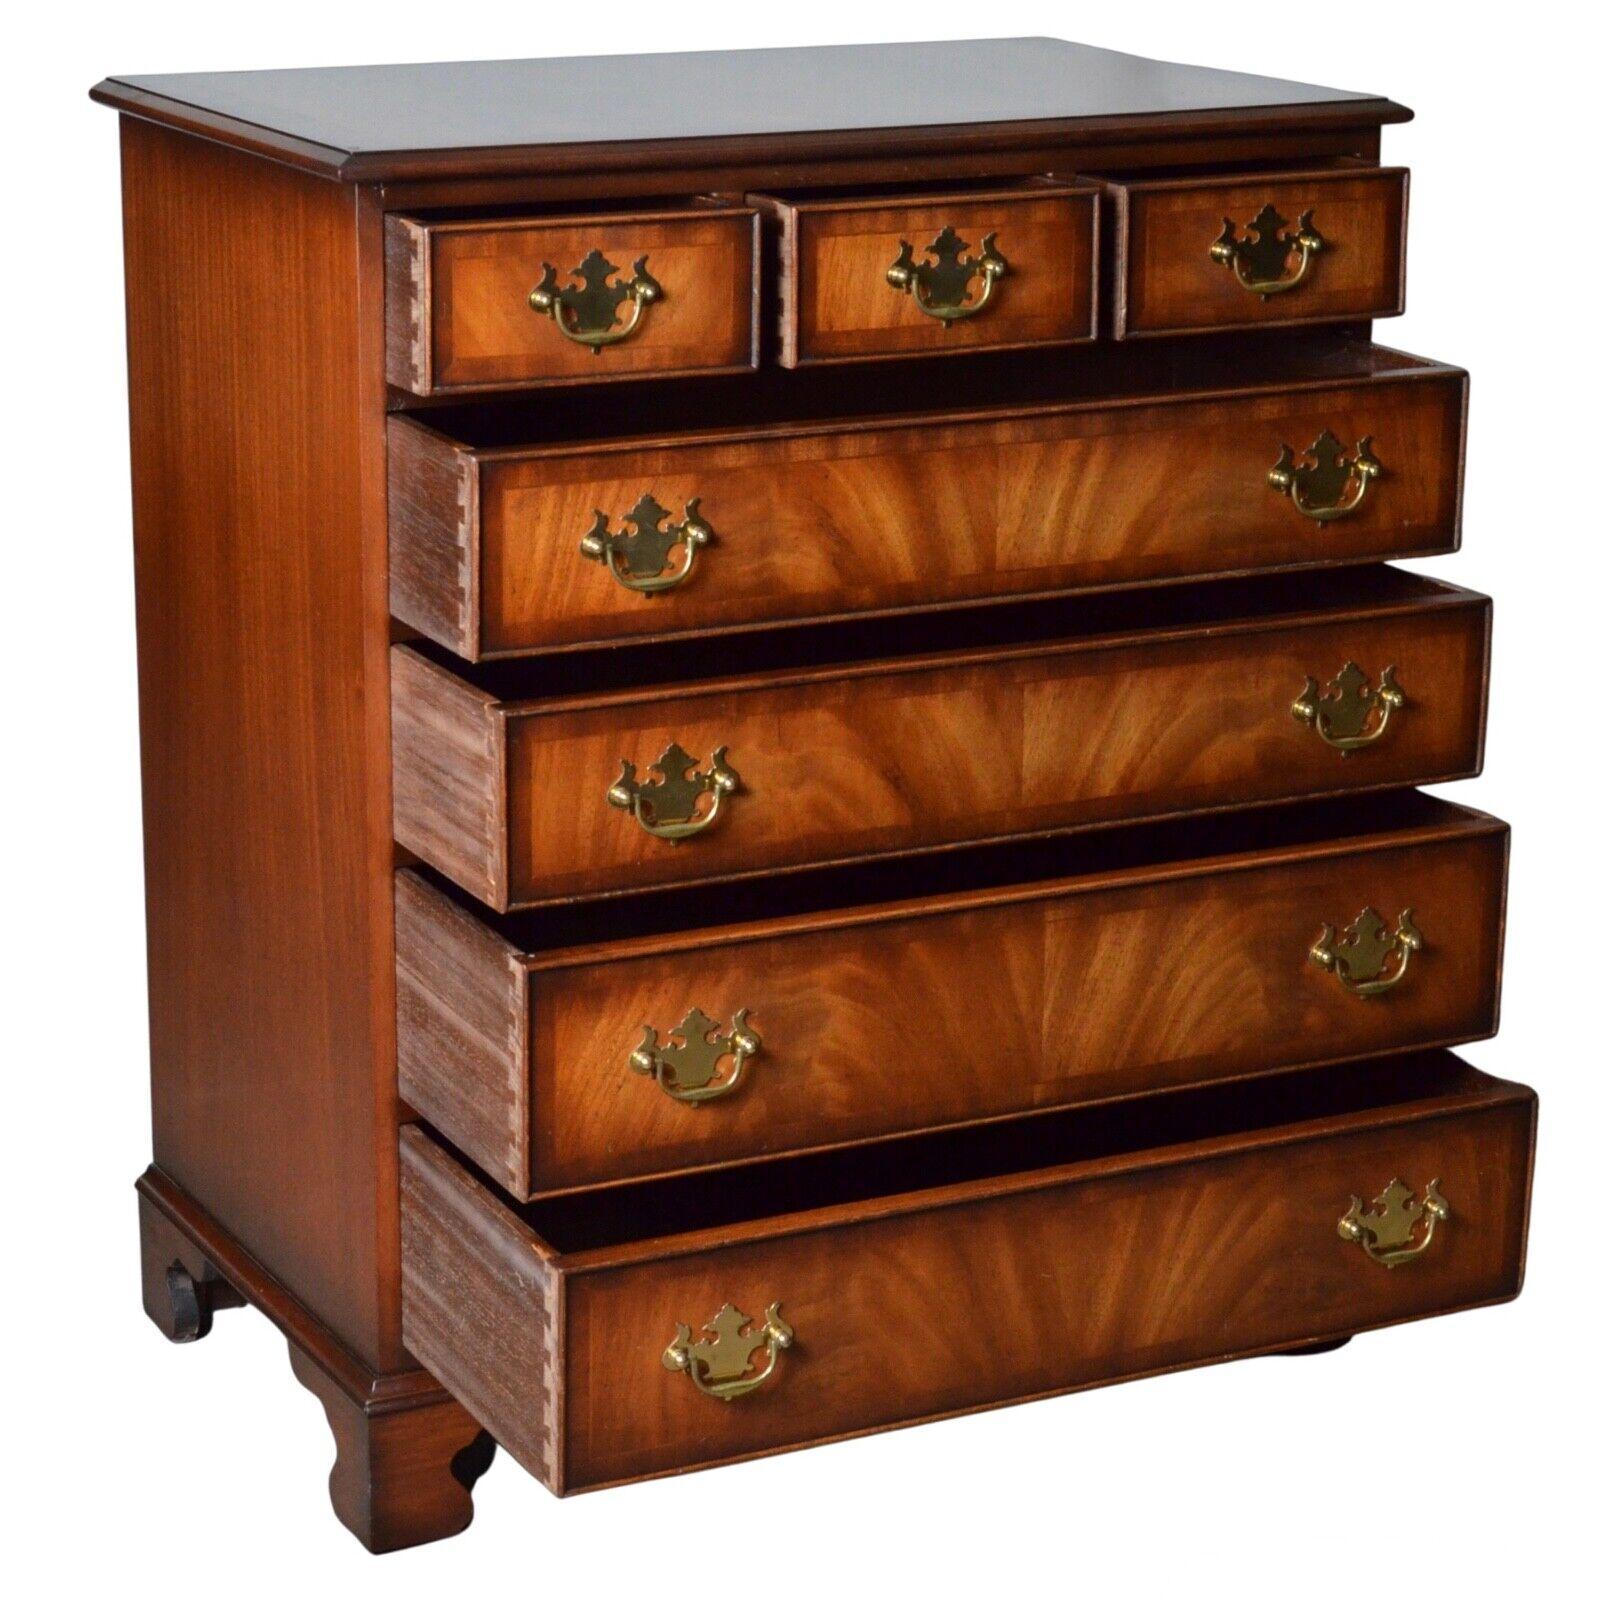 English Lovely Antique Georgian Hardwood Chest of Drawers with a Hidden Drawer For Sale